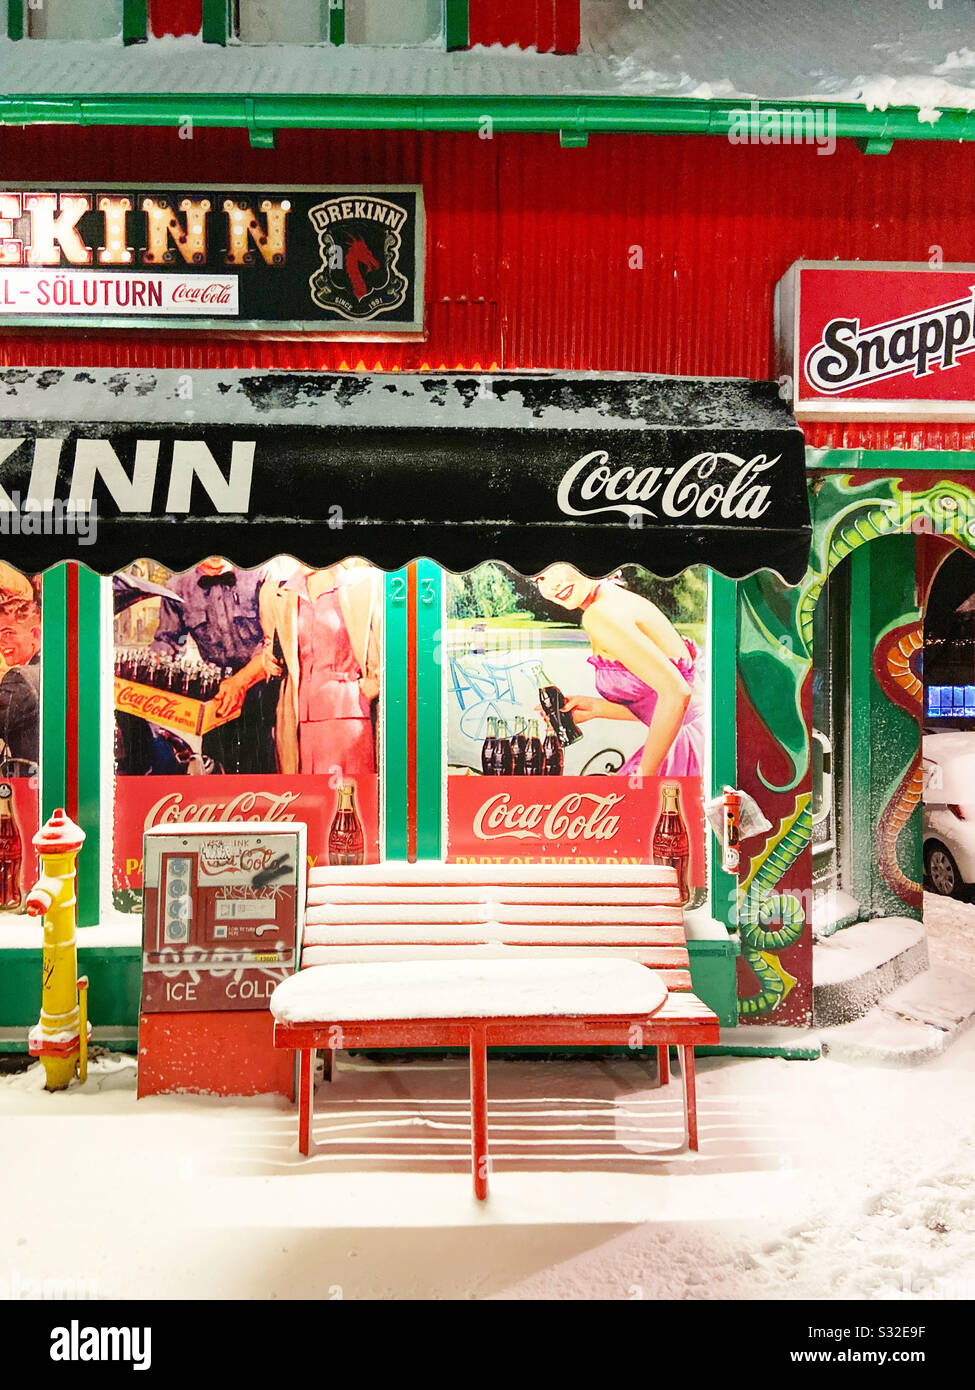 A red bench covered in snow outside a corner store in Reykjavik, Iceland on December 11, 2019. Stock Photo